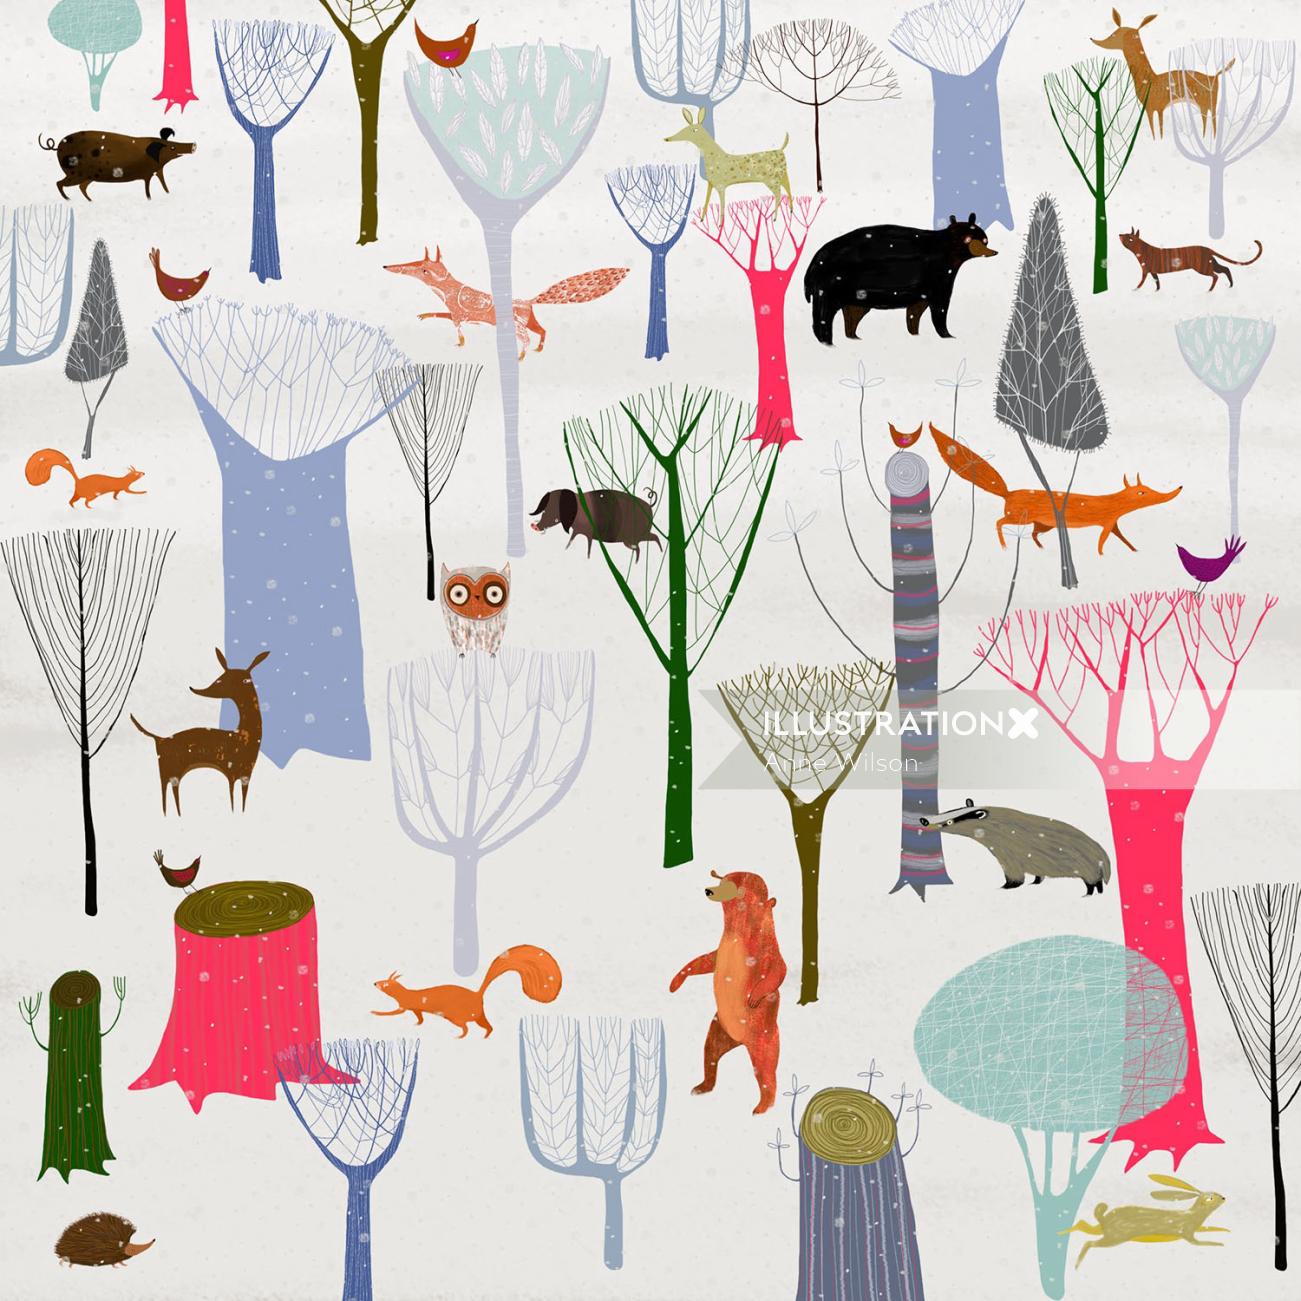 An illustration of animals in the winter